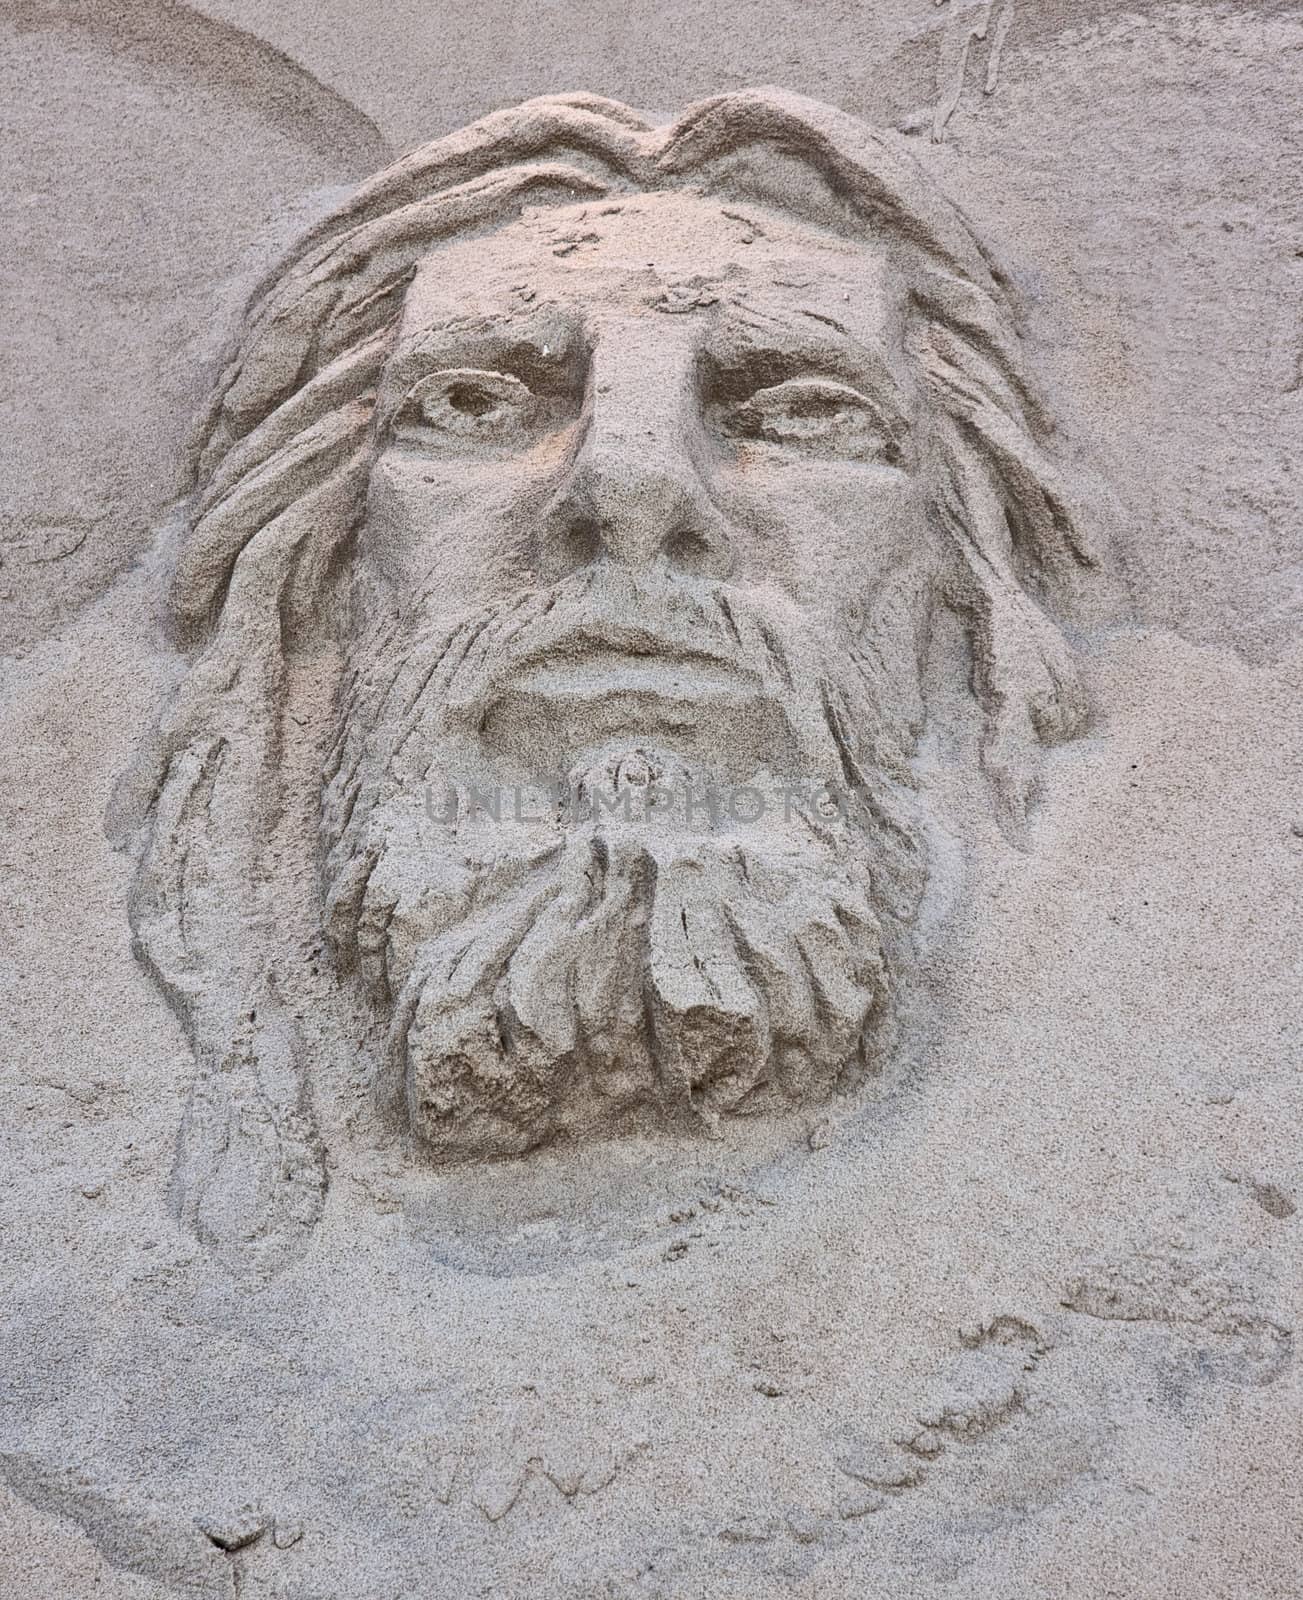 A sand sculpture at the beach of the face of Jesus